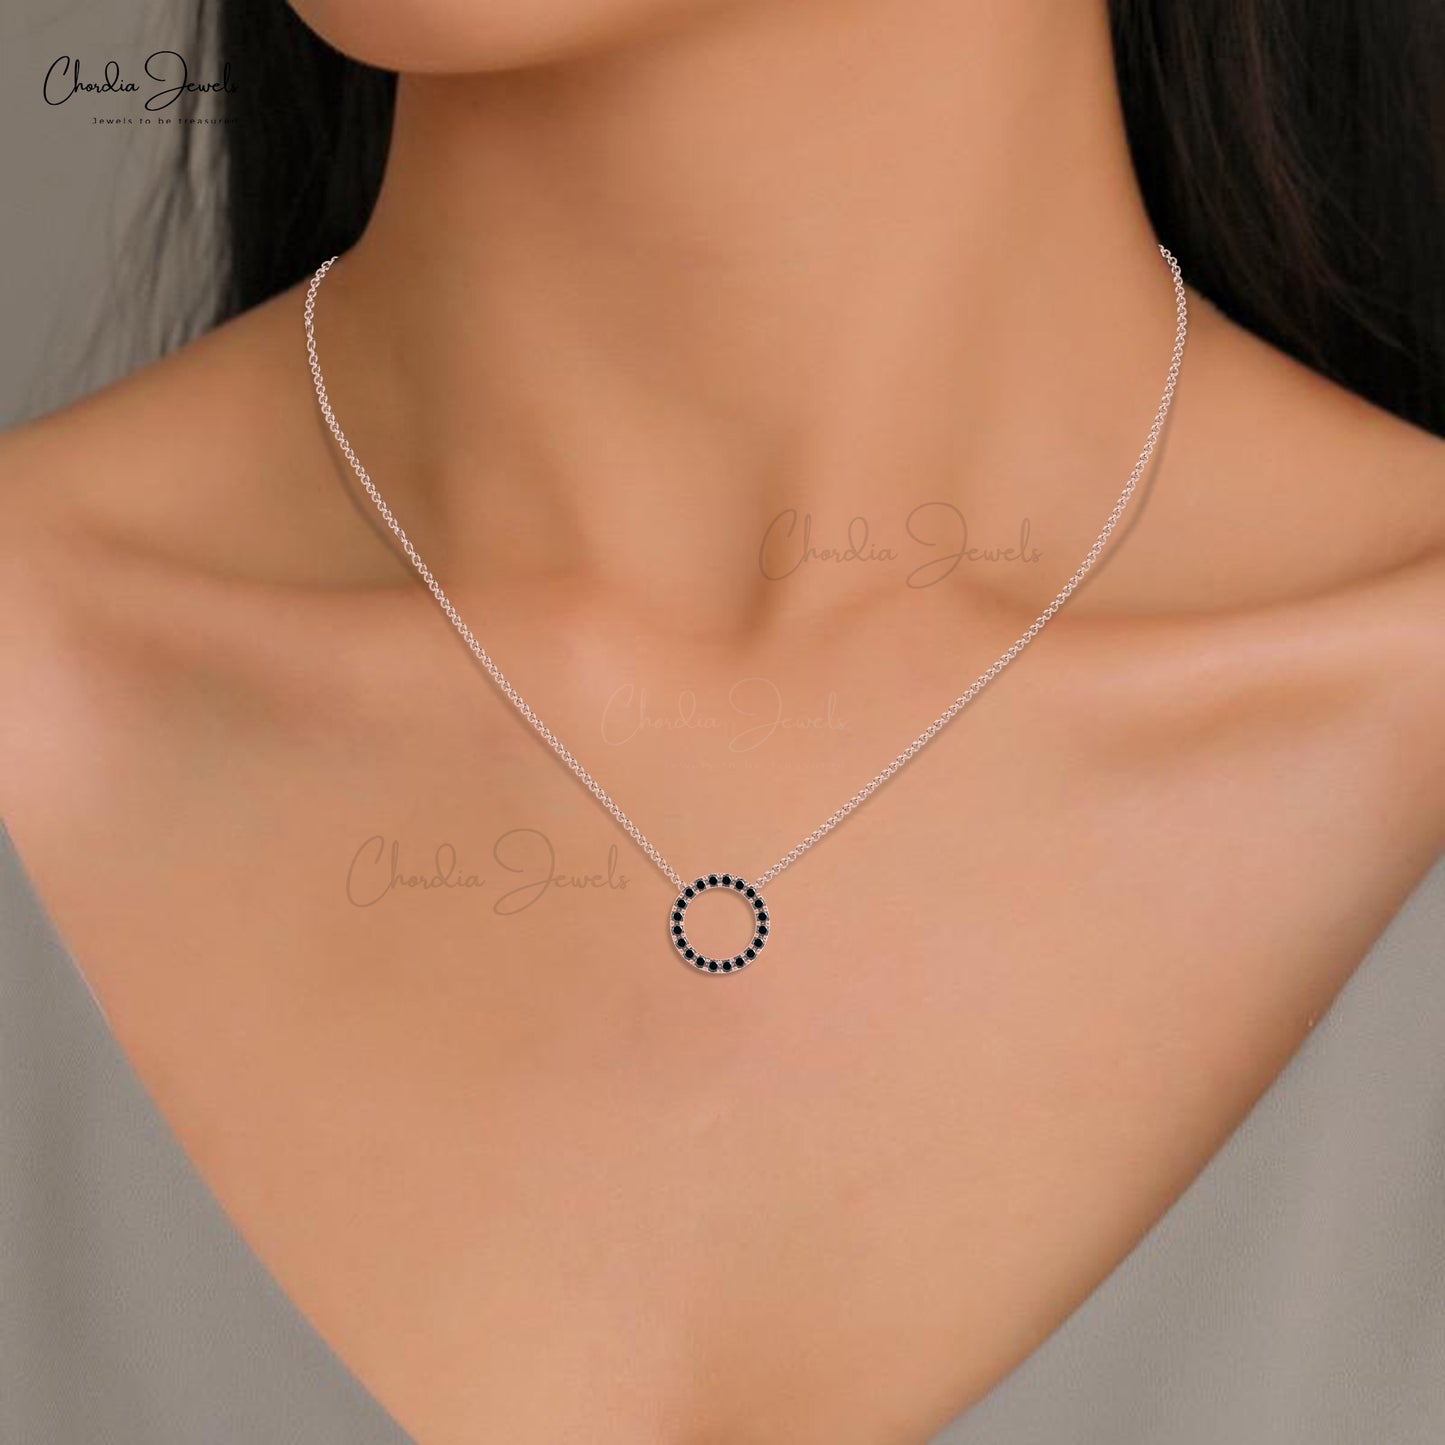 Natural Black Diamond Open Circle Necklace 14k Real Gold 2mm Round Cut Gemstone Necklace Dainty Jewelry For Bridesmaid Gift